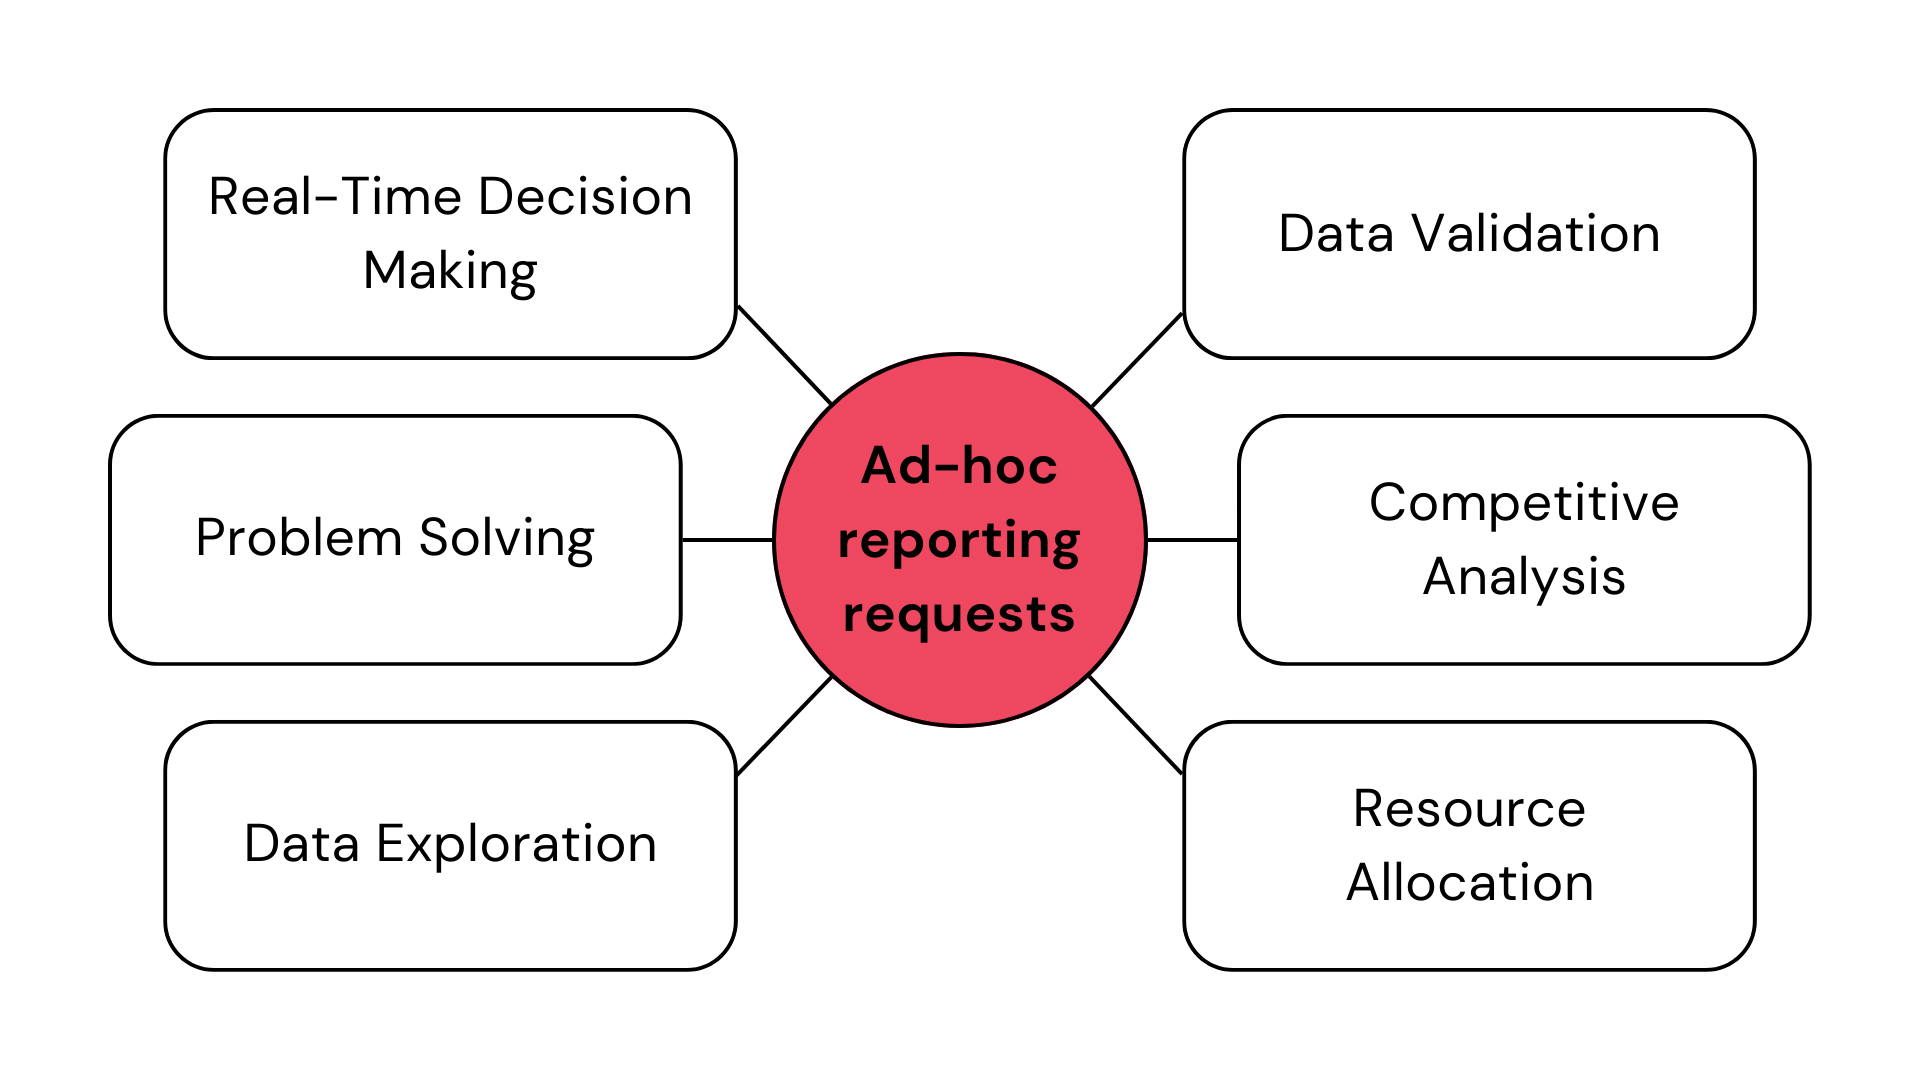 Ad-hoc reporting requests